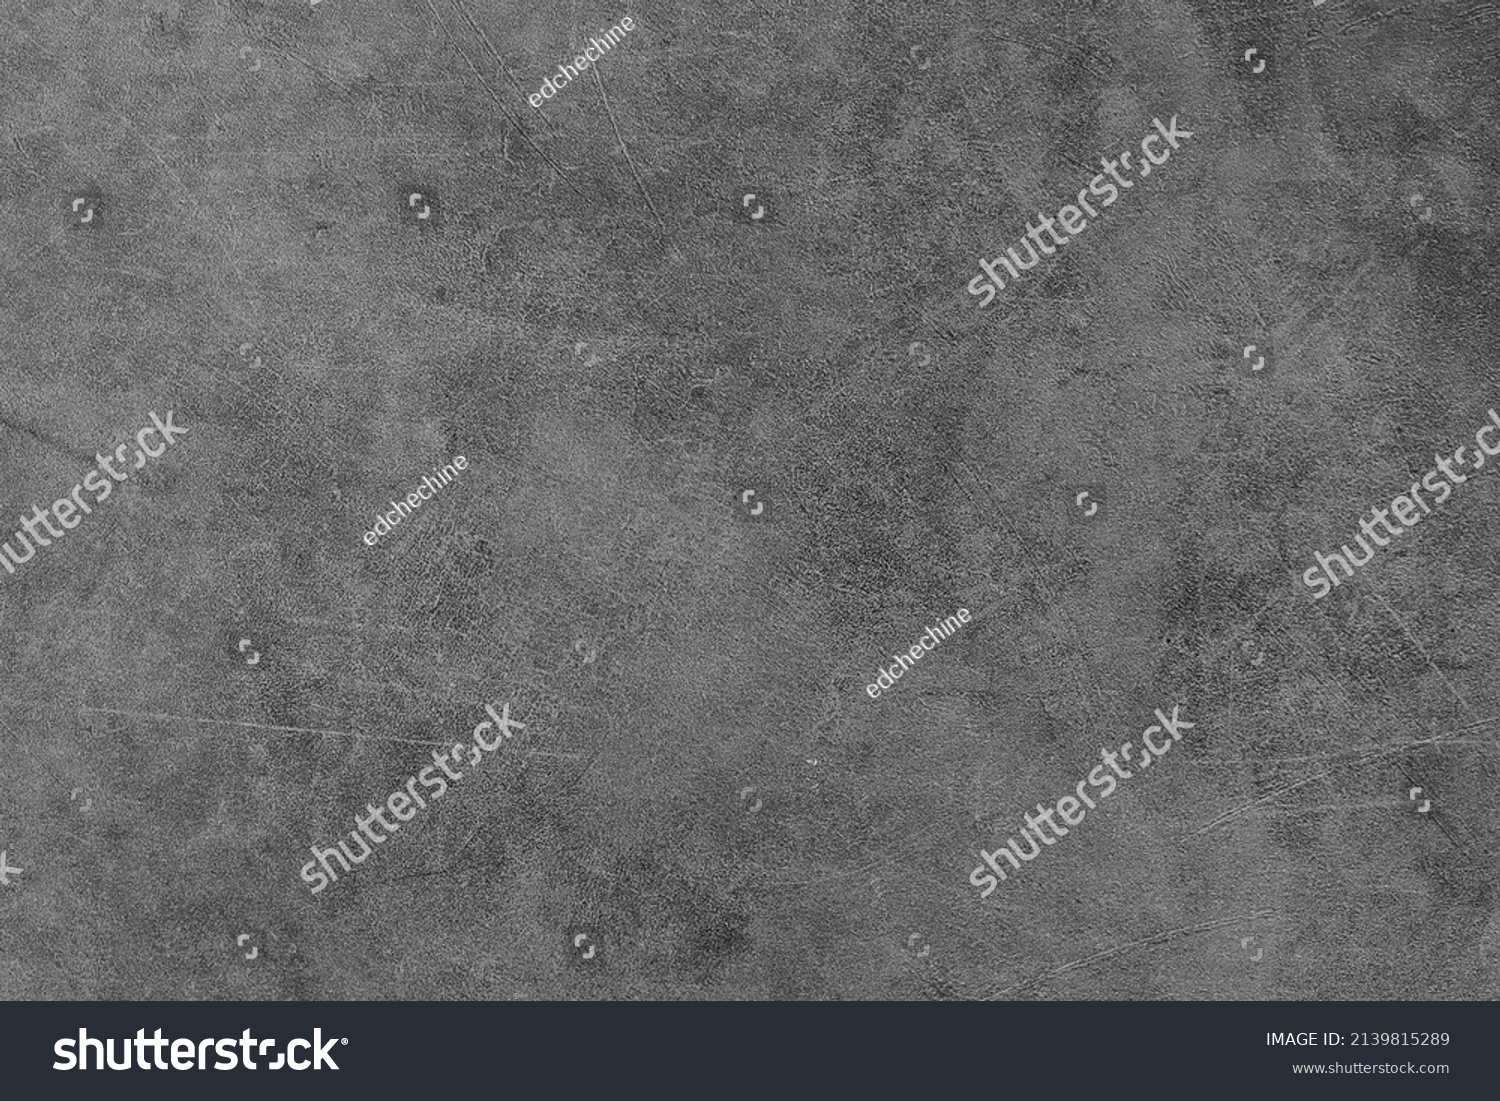 Grey stone, concrete background pattern with high resolution. Top view with copy space #2139815289